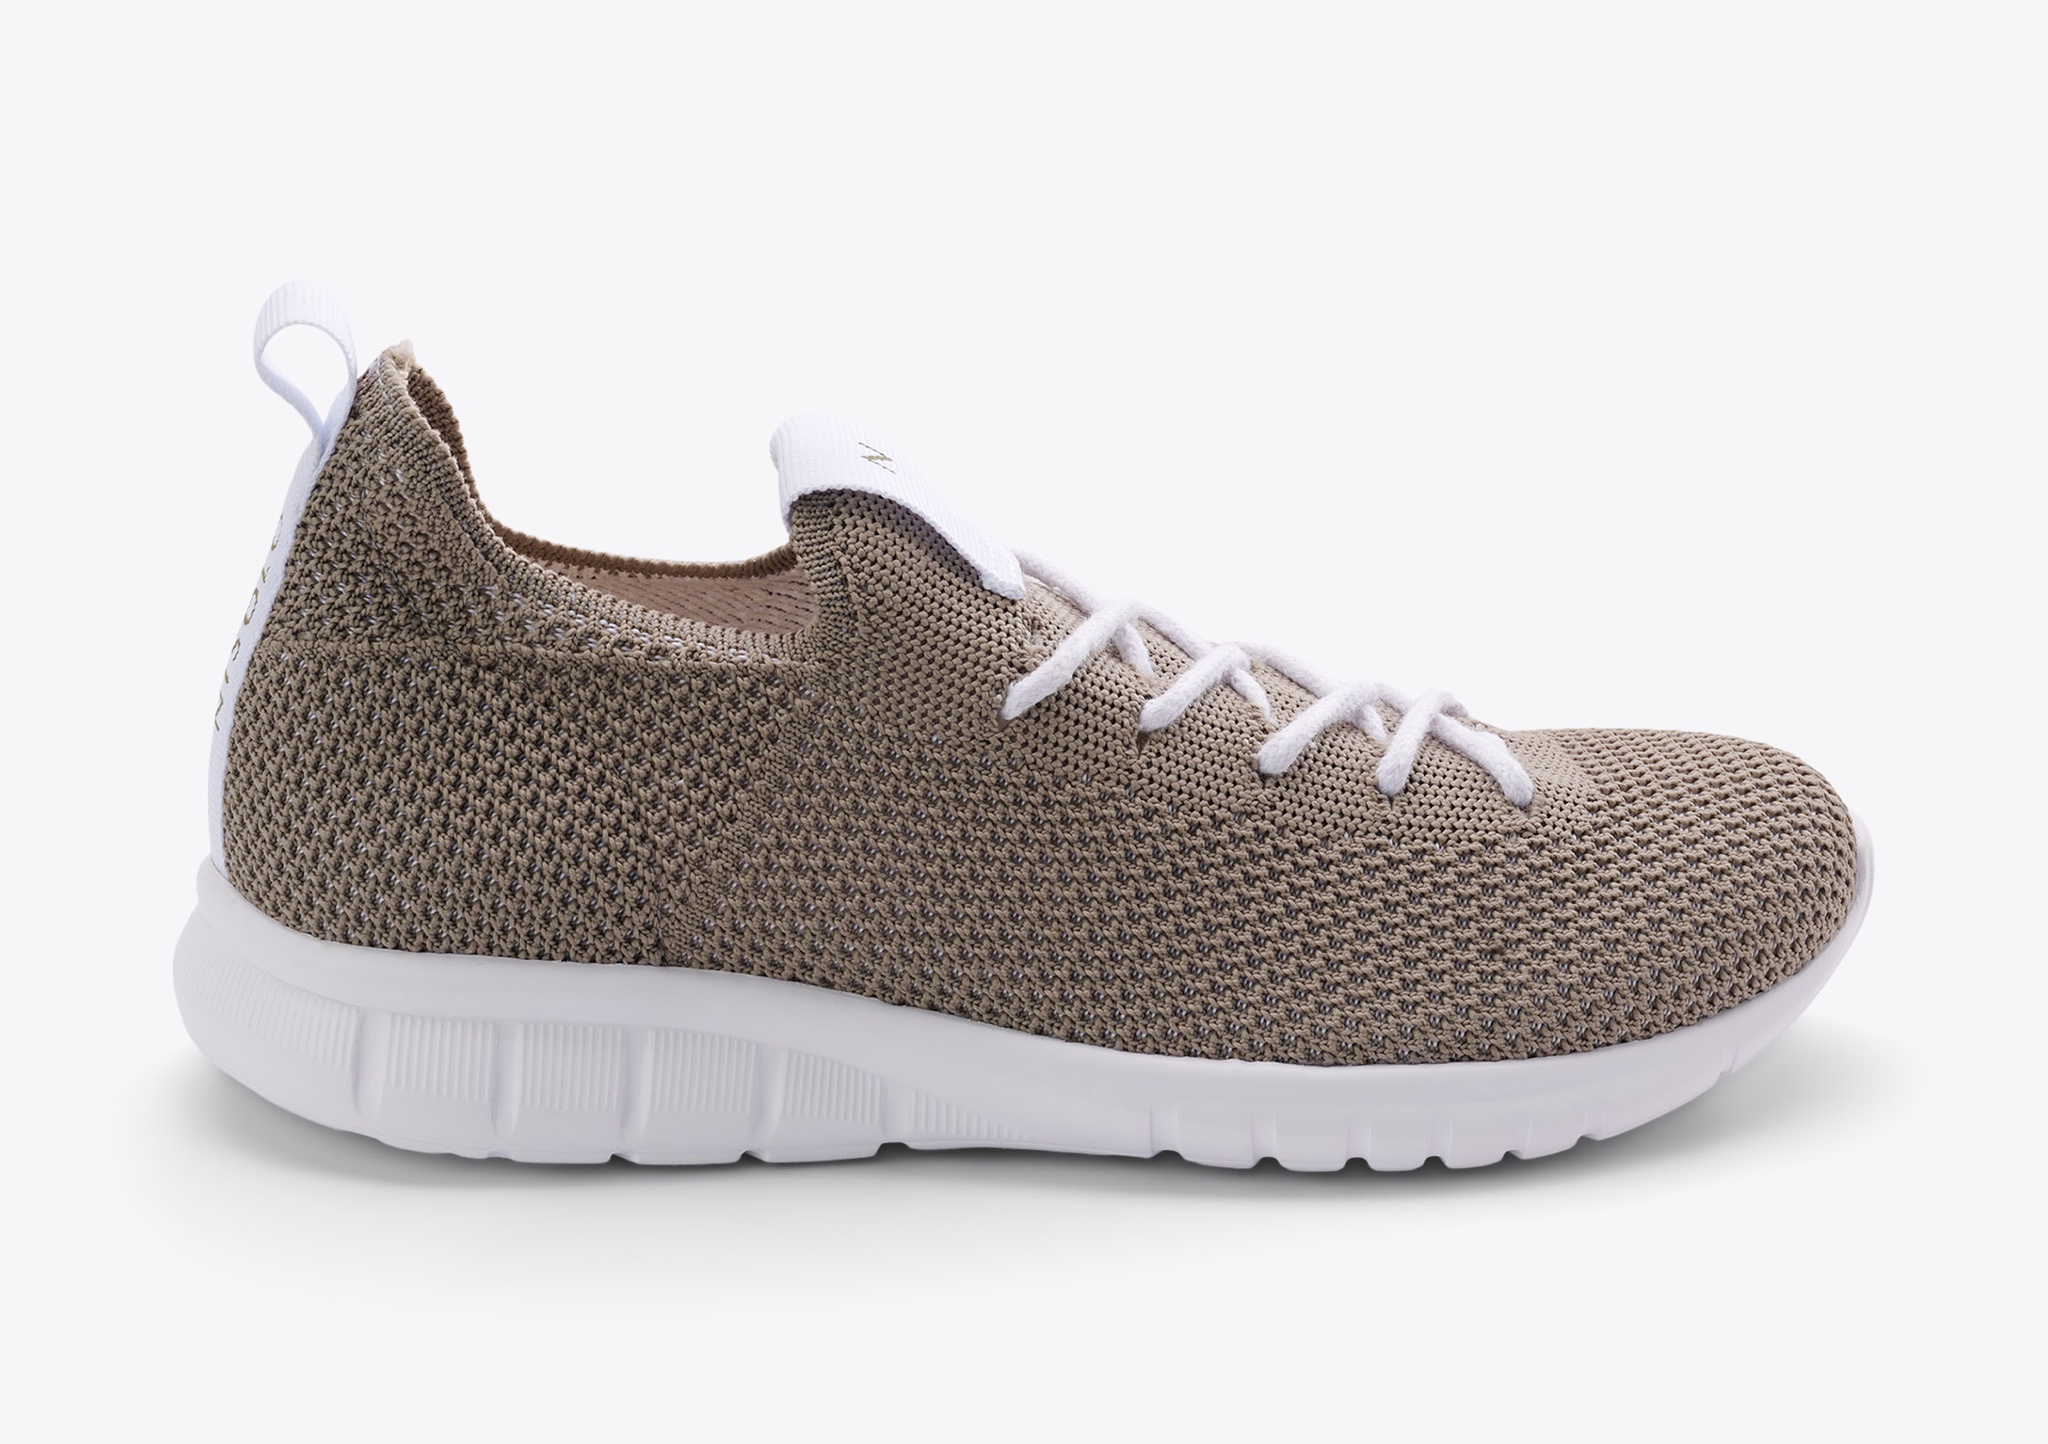 Nisolo Women's Athleisure Eco-Knit Sneaker Grey - Every Nisolo product is built on the foundation of comfort, function, and design. 